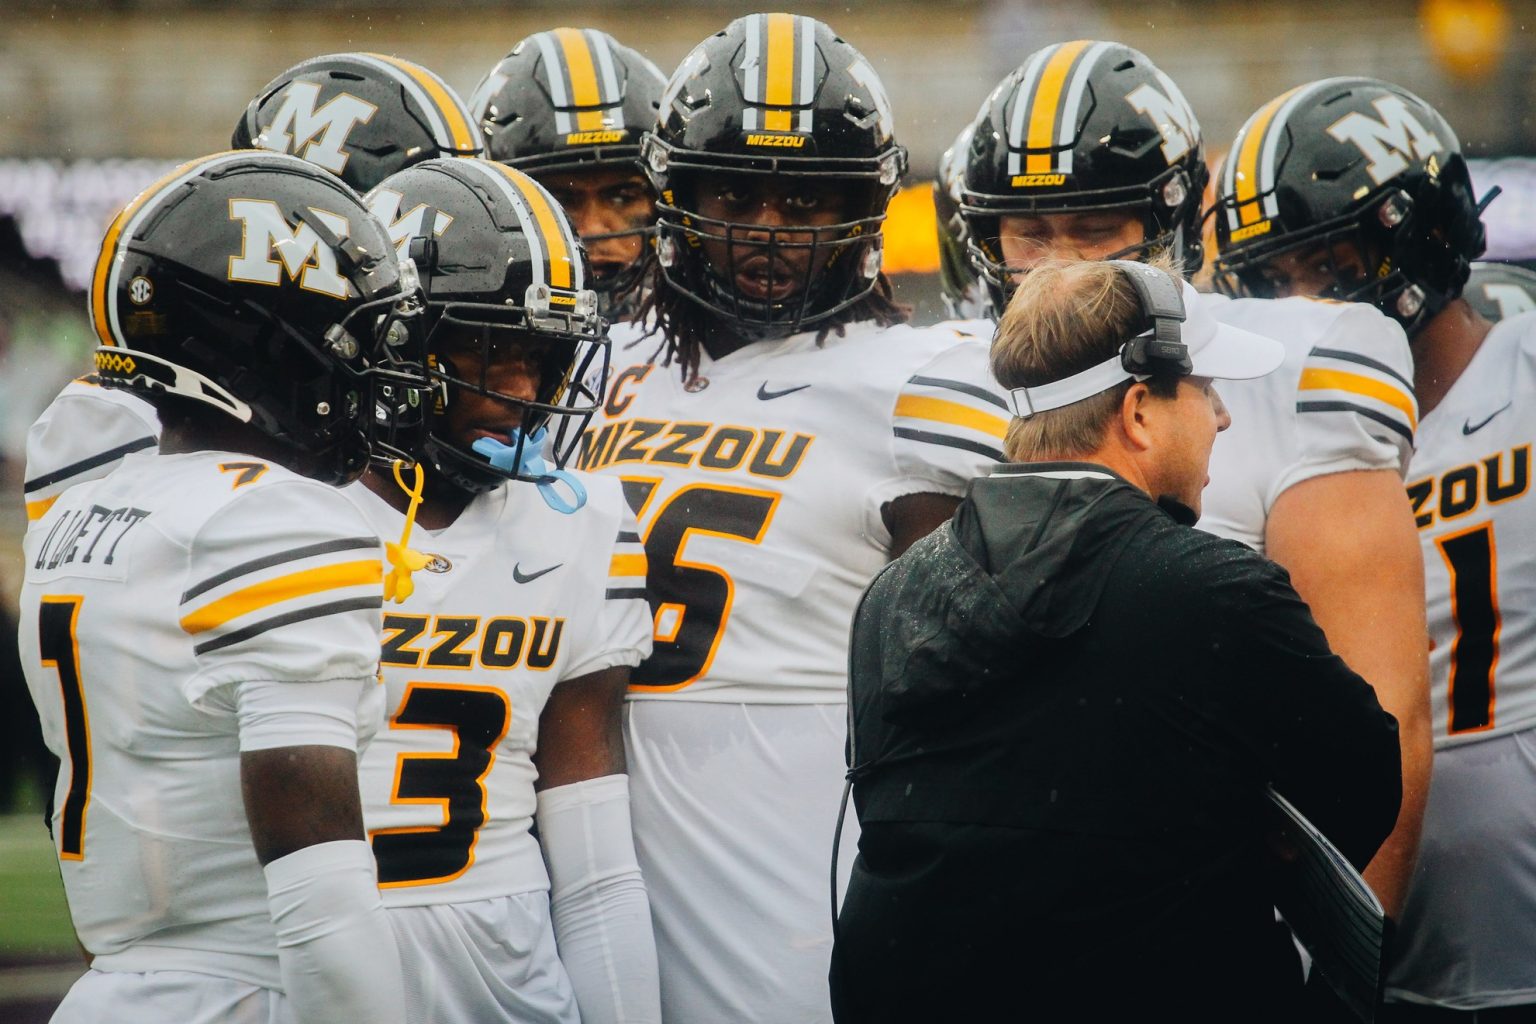 What will Mizzou football depth chart look like on offense?